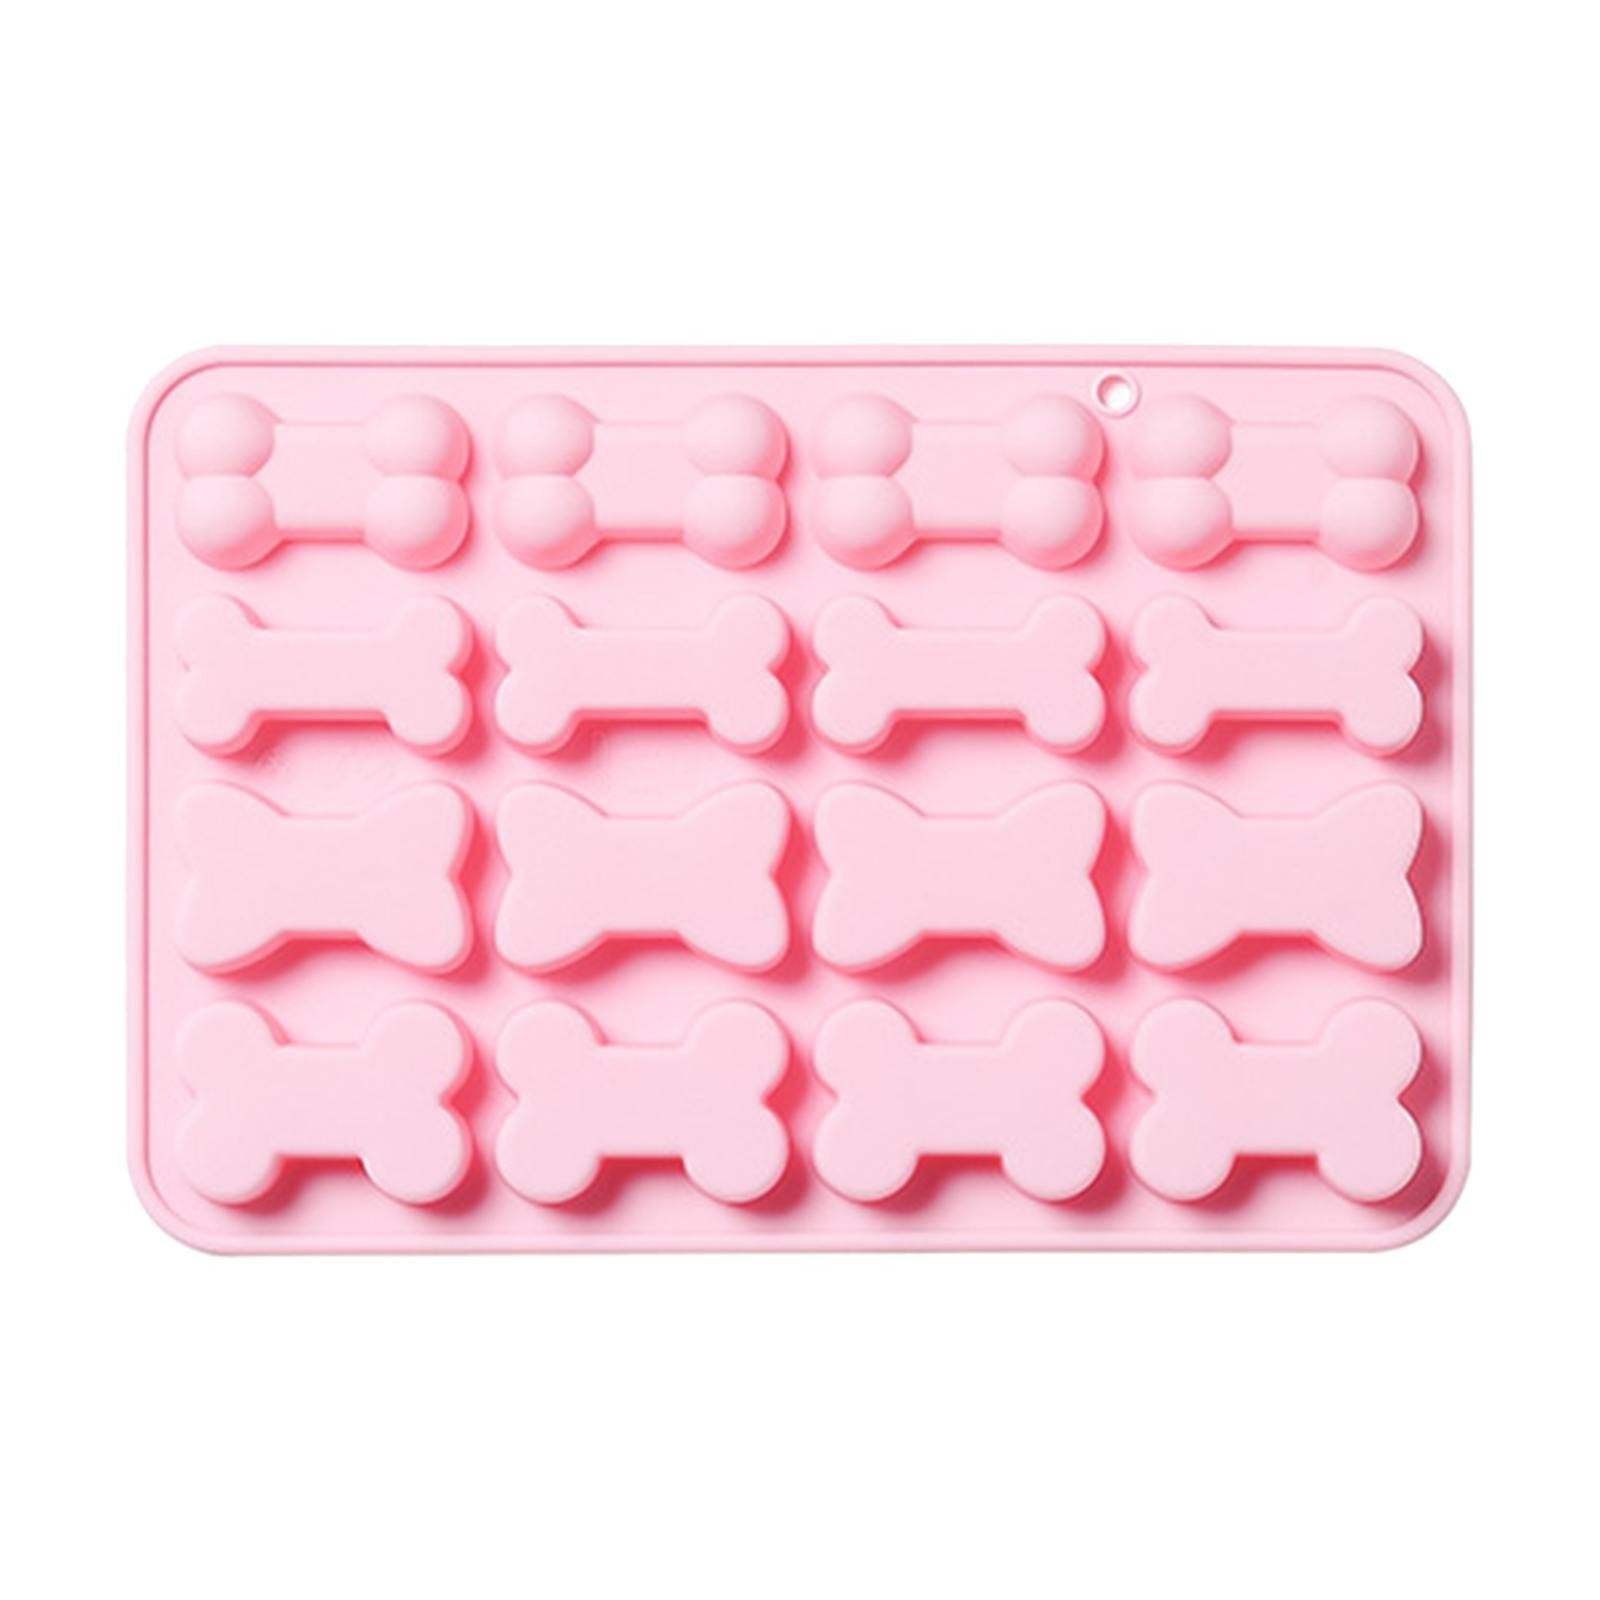 Valentine Silicone Molds for Chocolate Yule Log Cake Pan Disposable 16 Different Bone Shape Silicone Chocolate Ice Lattice Baking Pet Cookies Baking